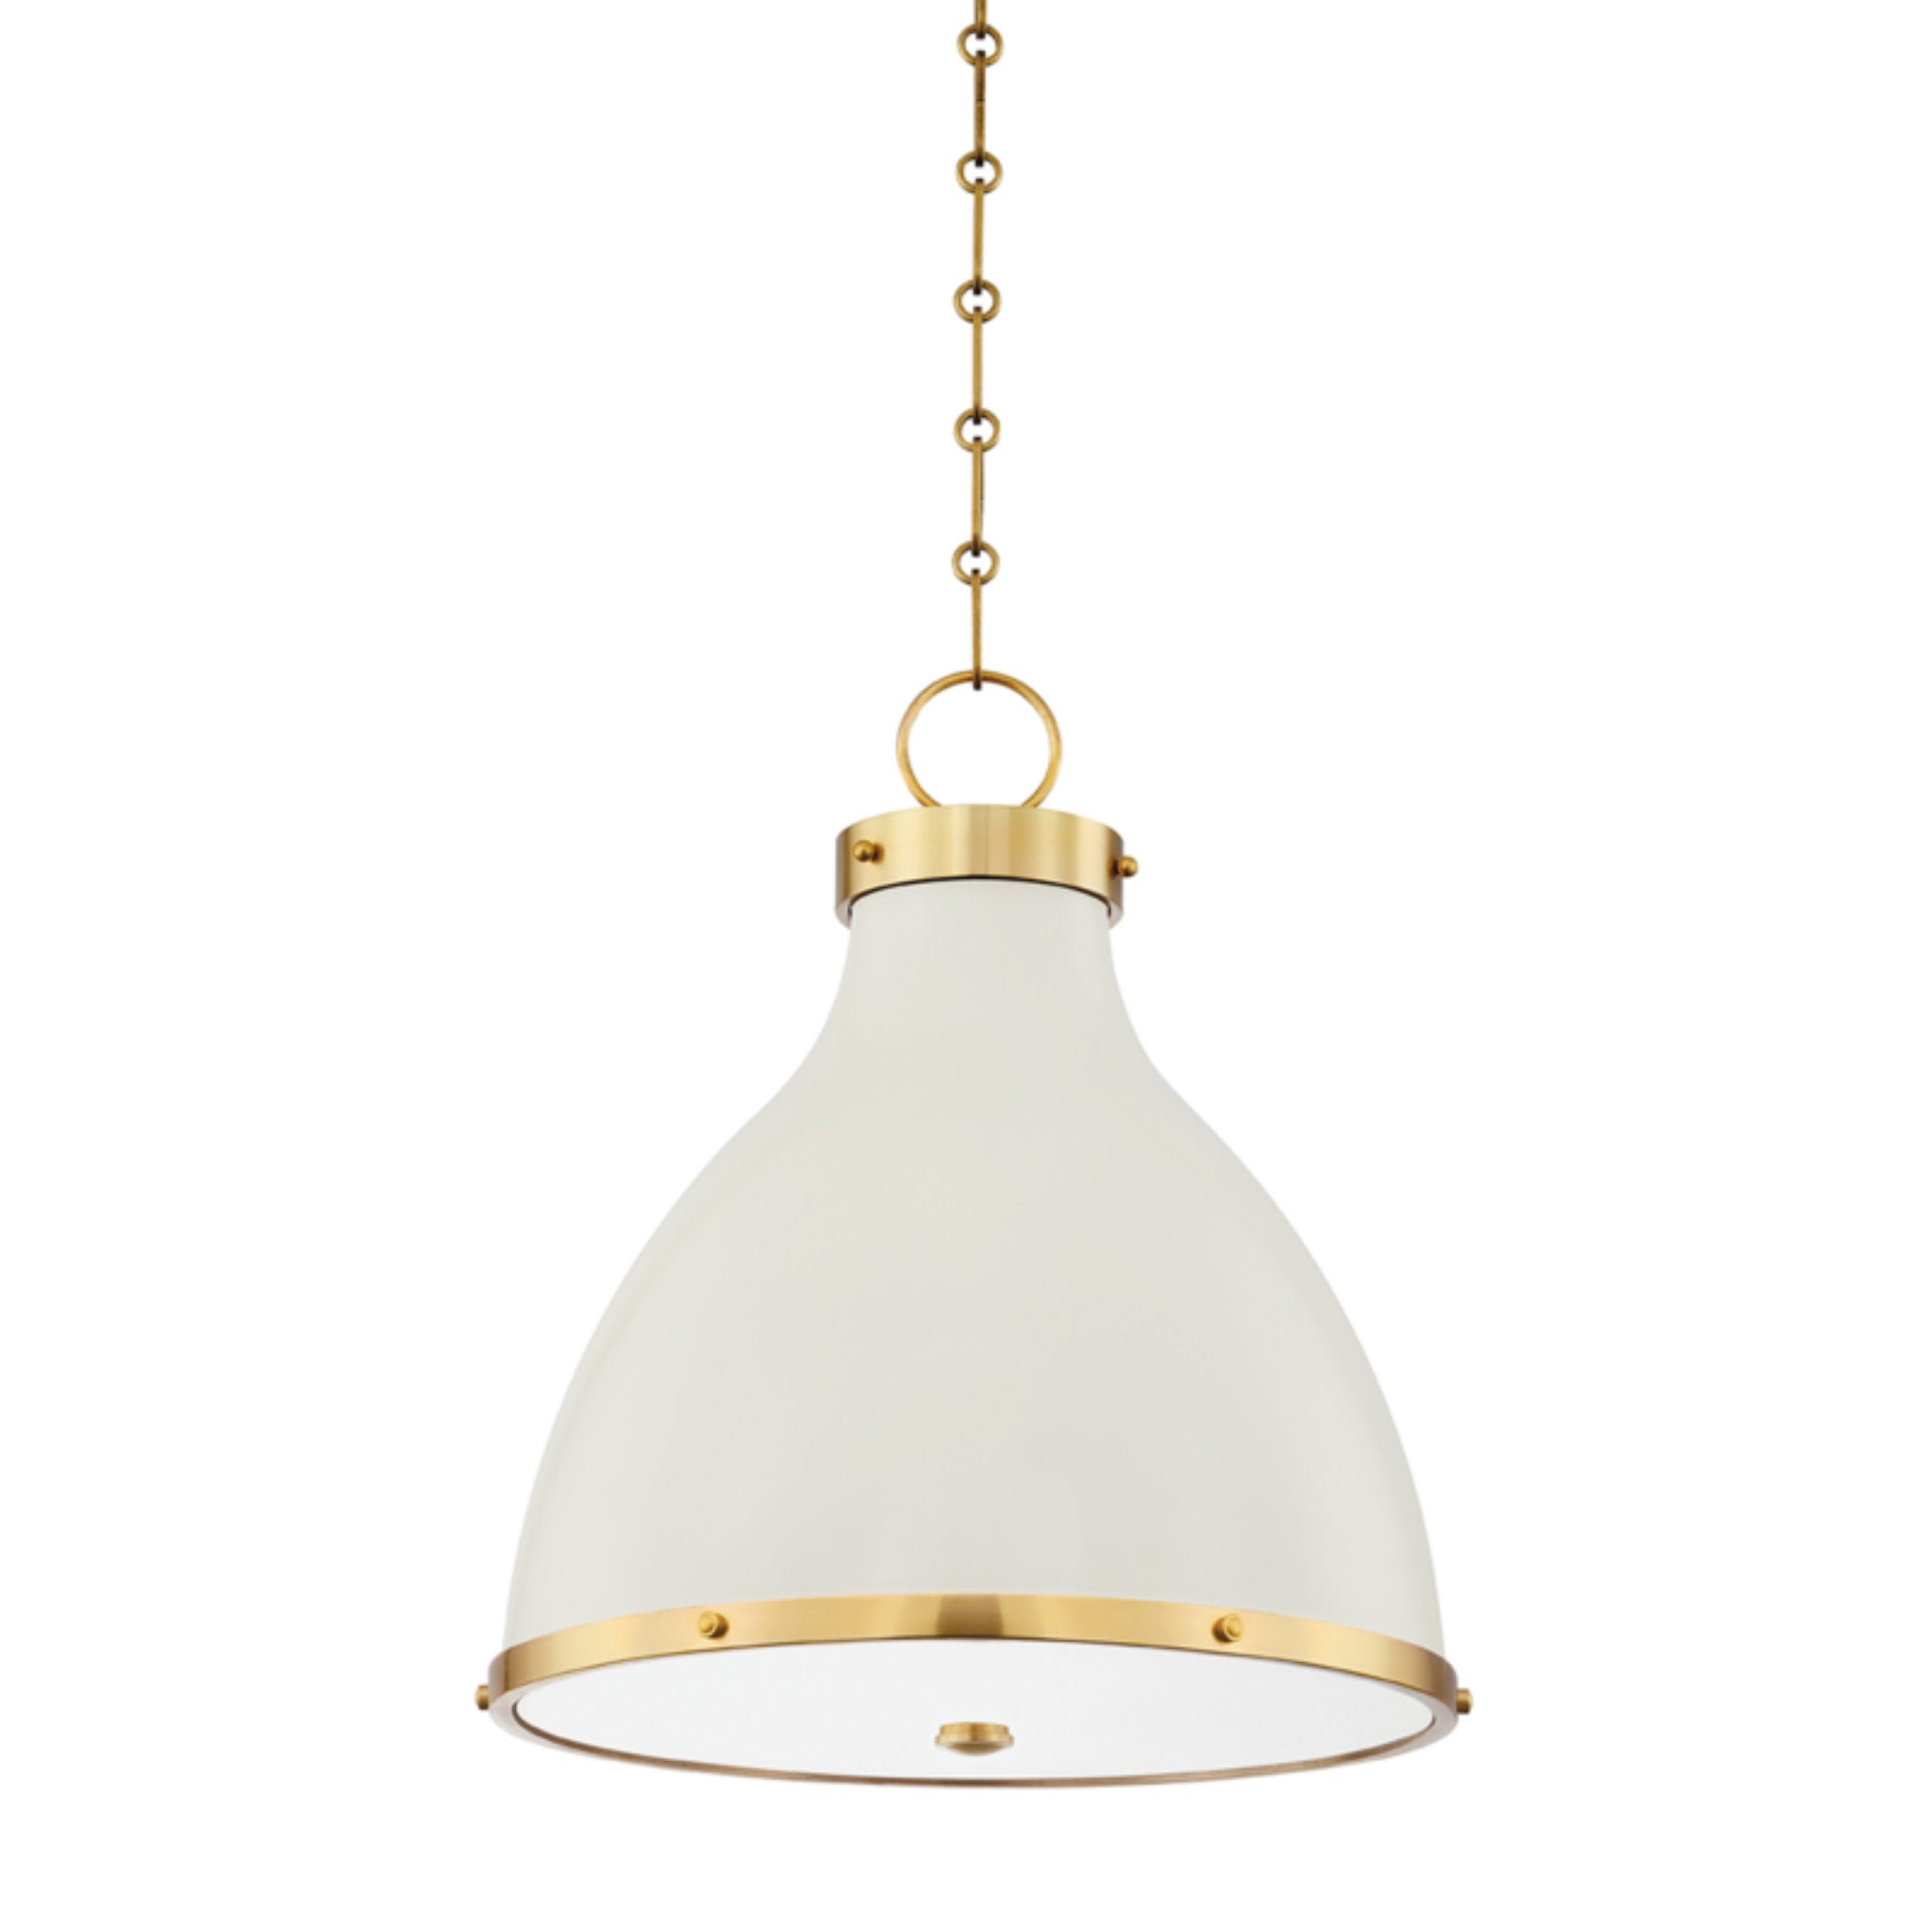 Painted No. 3 2 Light Pendant in Aged Brass/off White by Mark D. Sikes